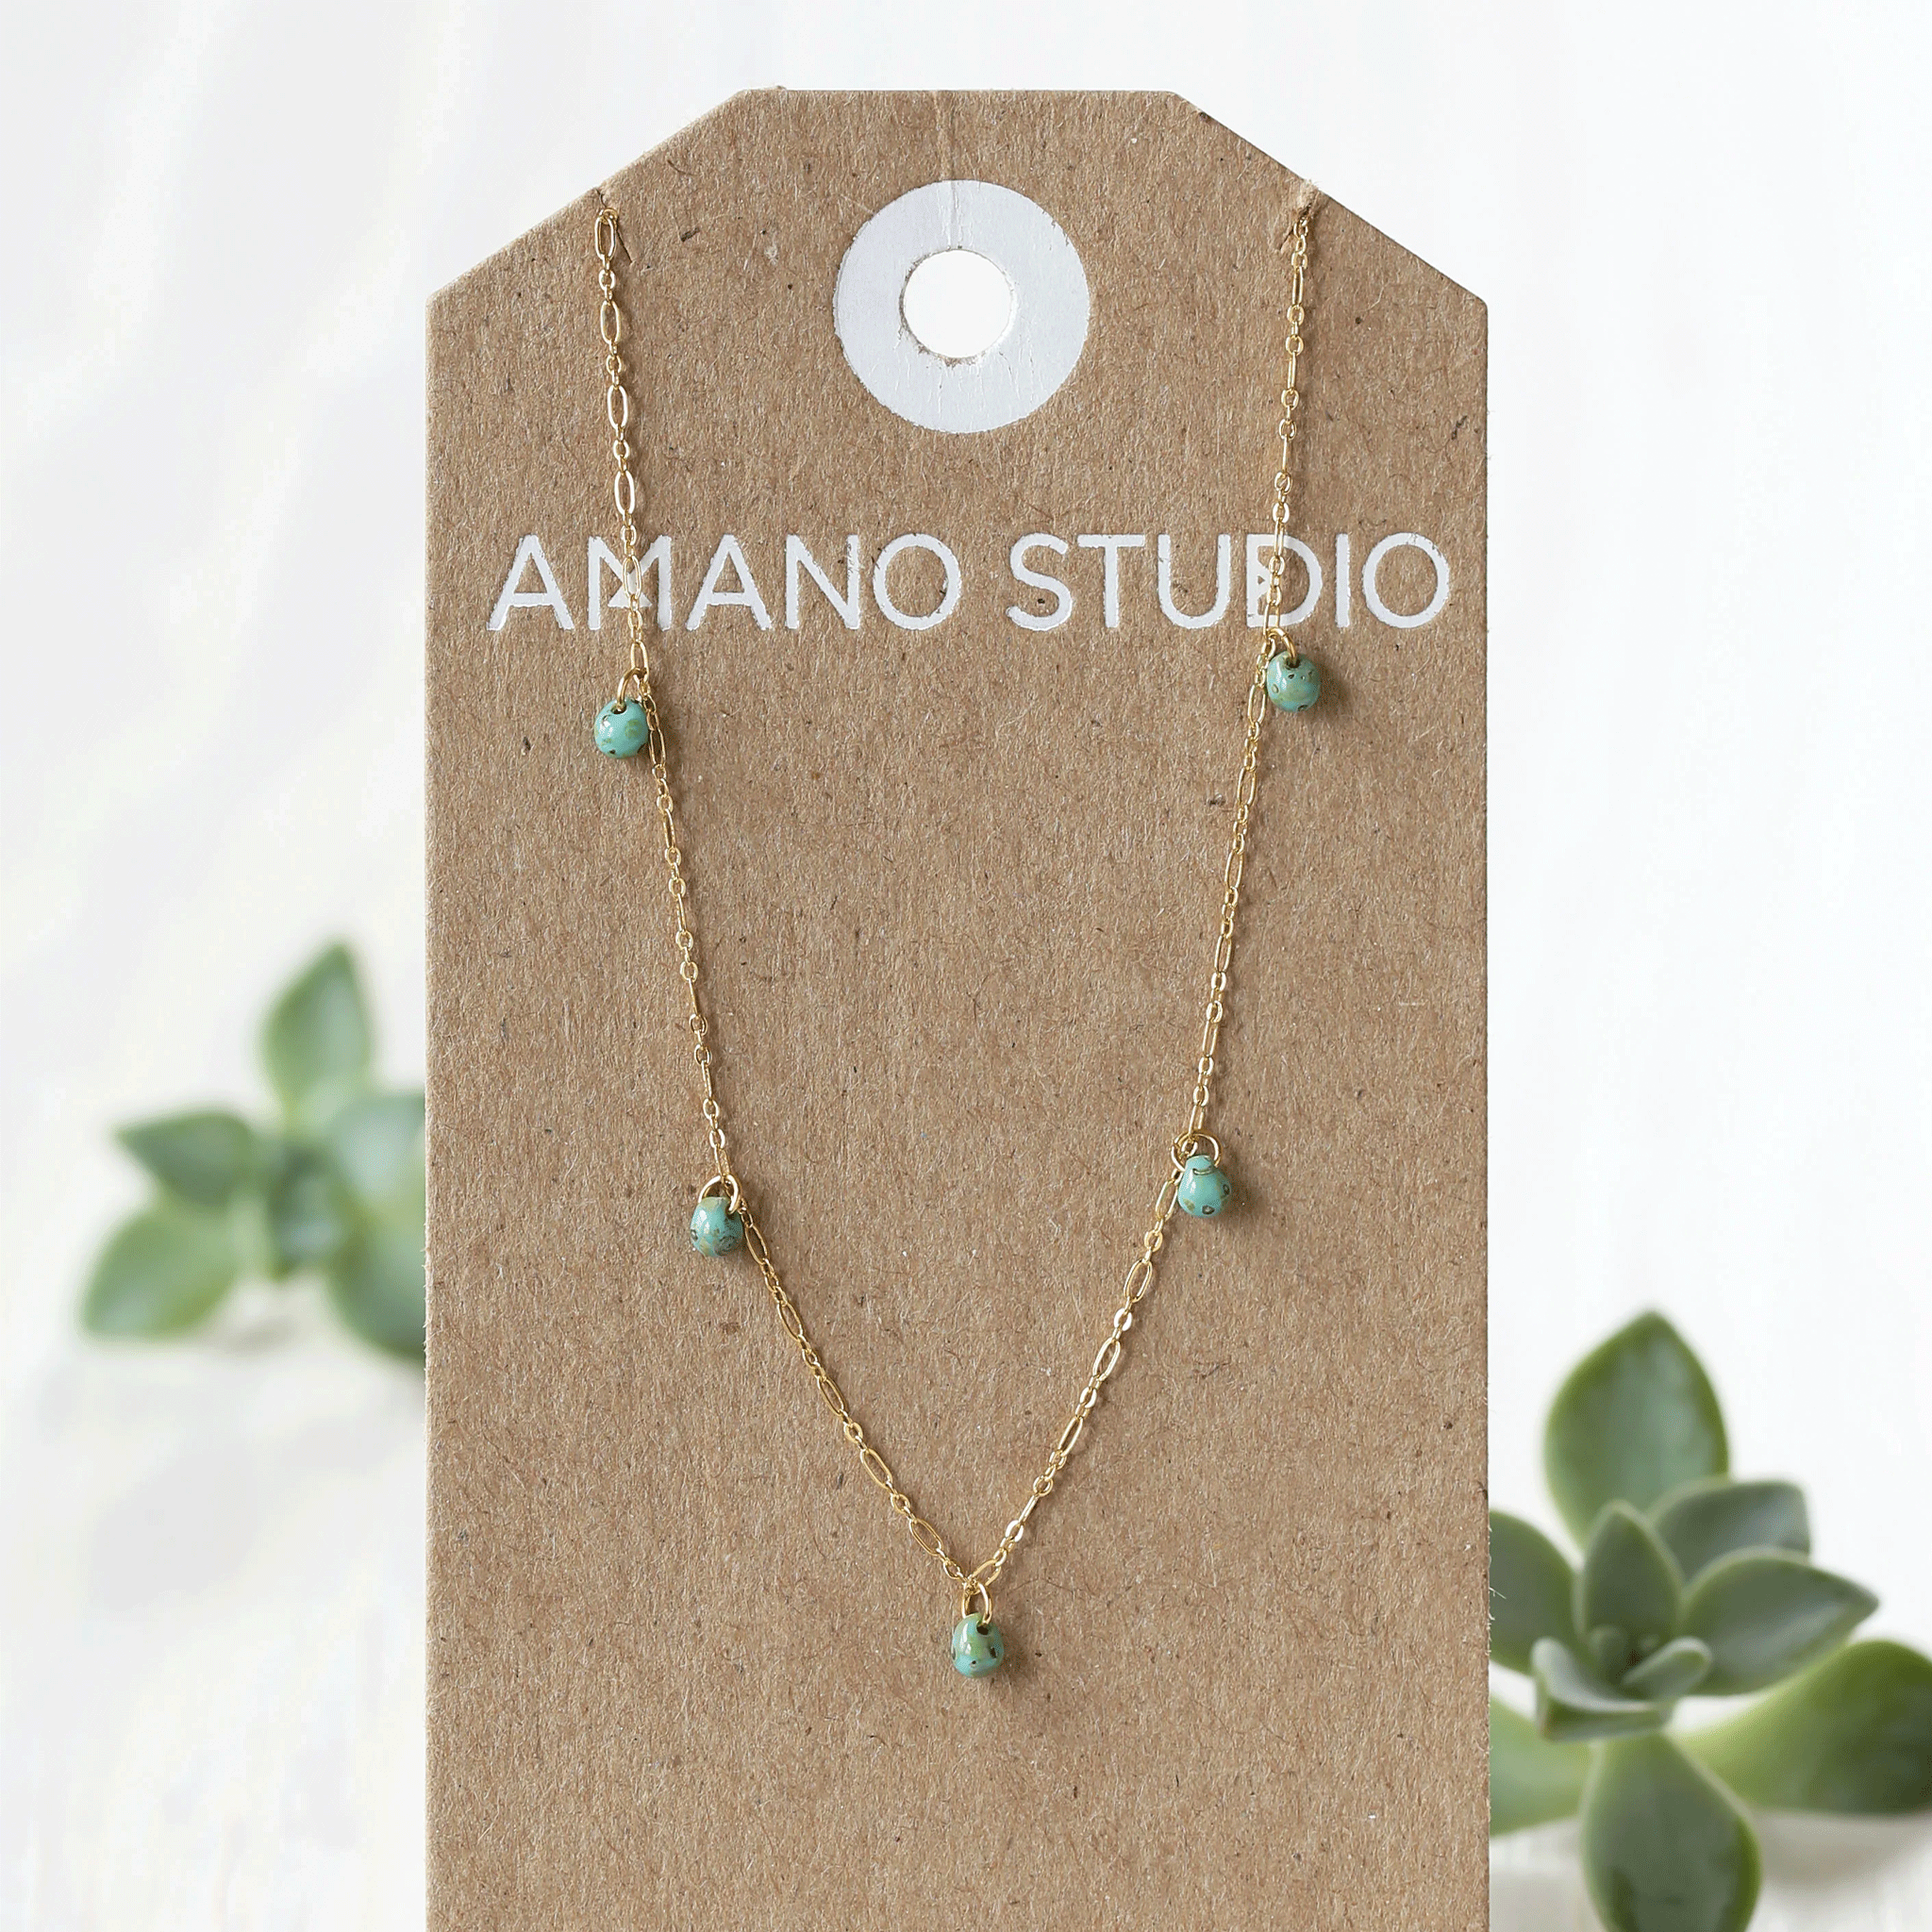 A gold dainty chain necklace with five turquoise beads spaced out along the chain. 